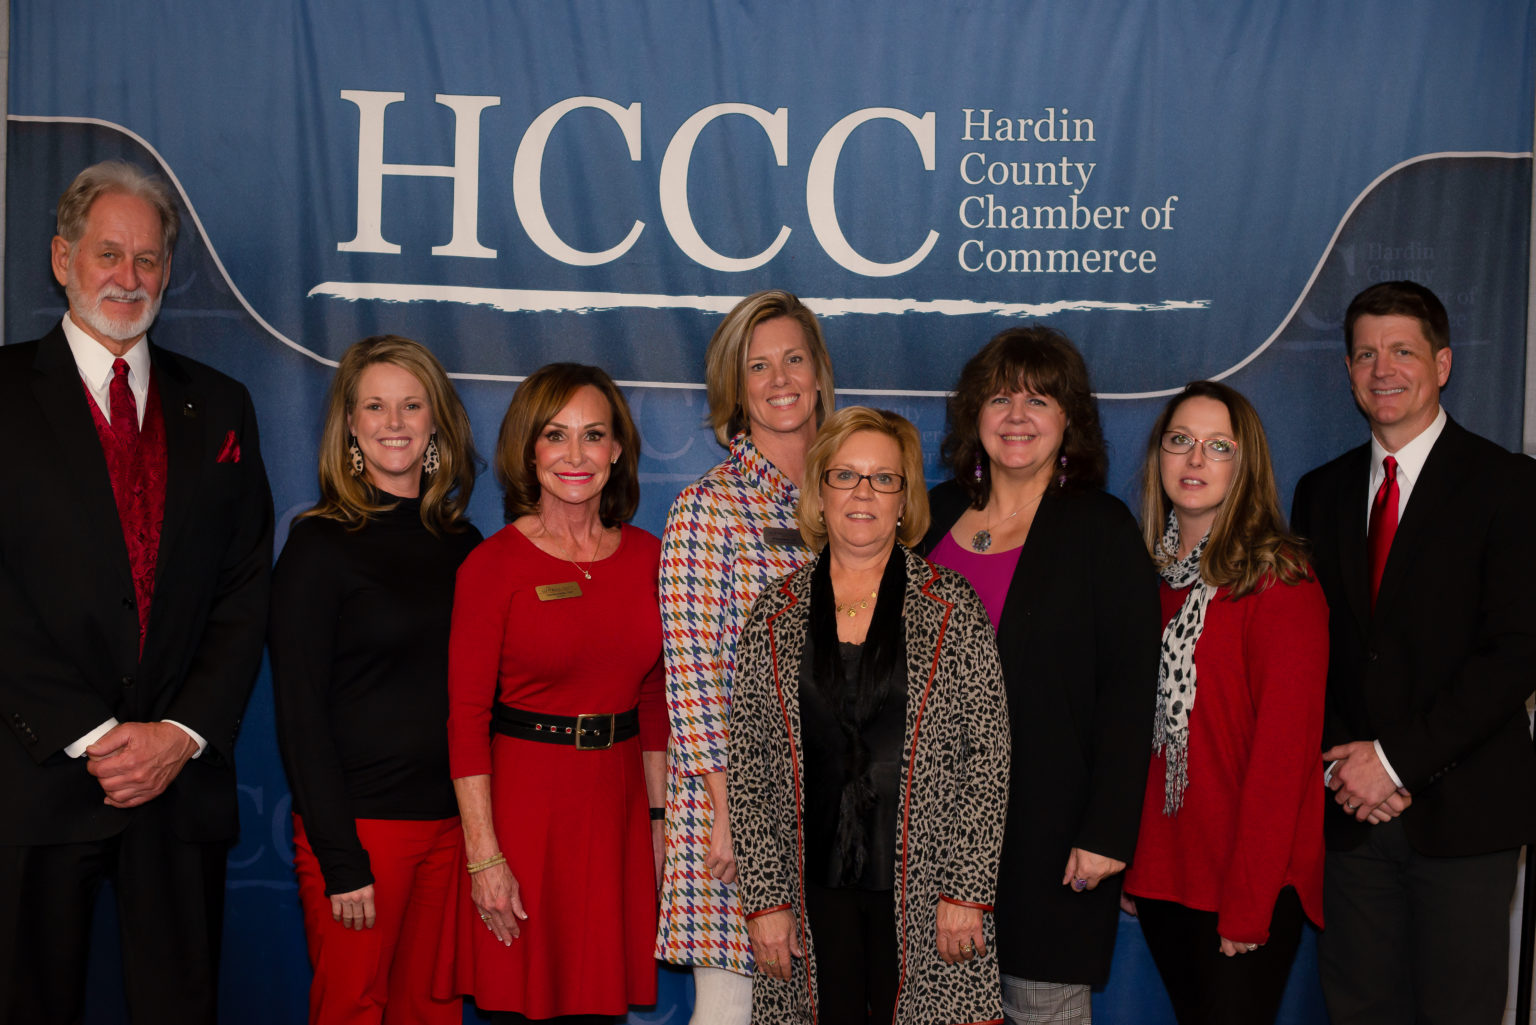 Luttrell Staffing joins Hardin County Chamber of Commerce